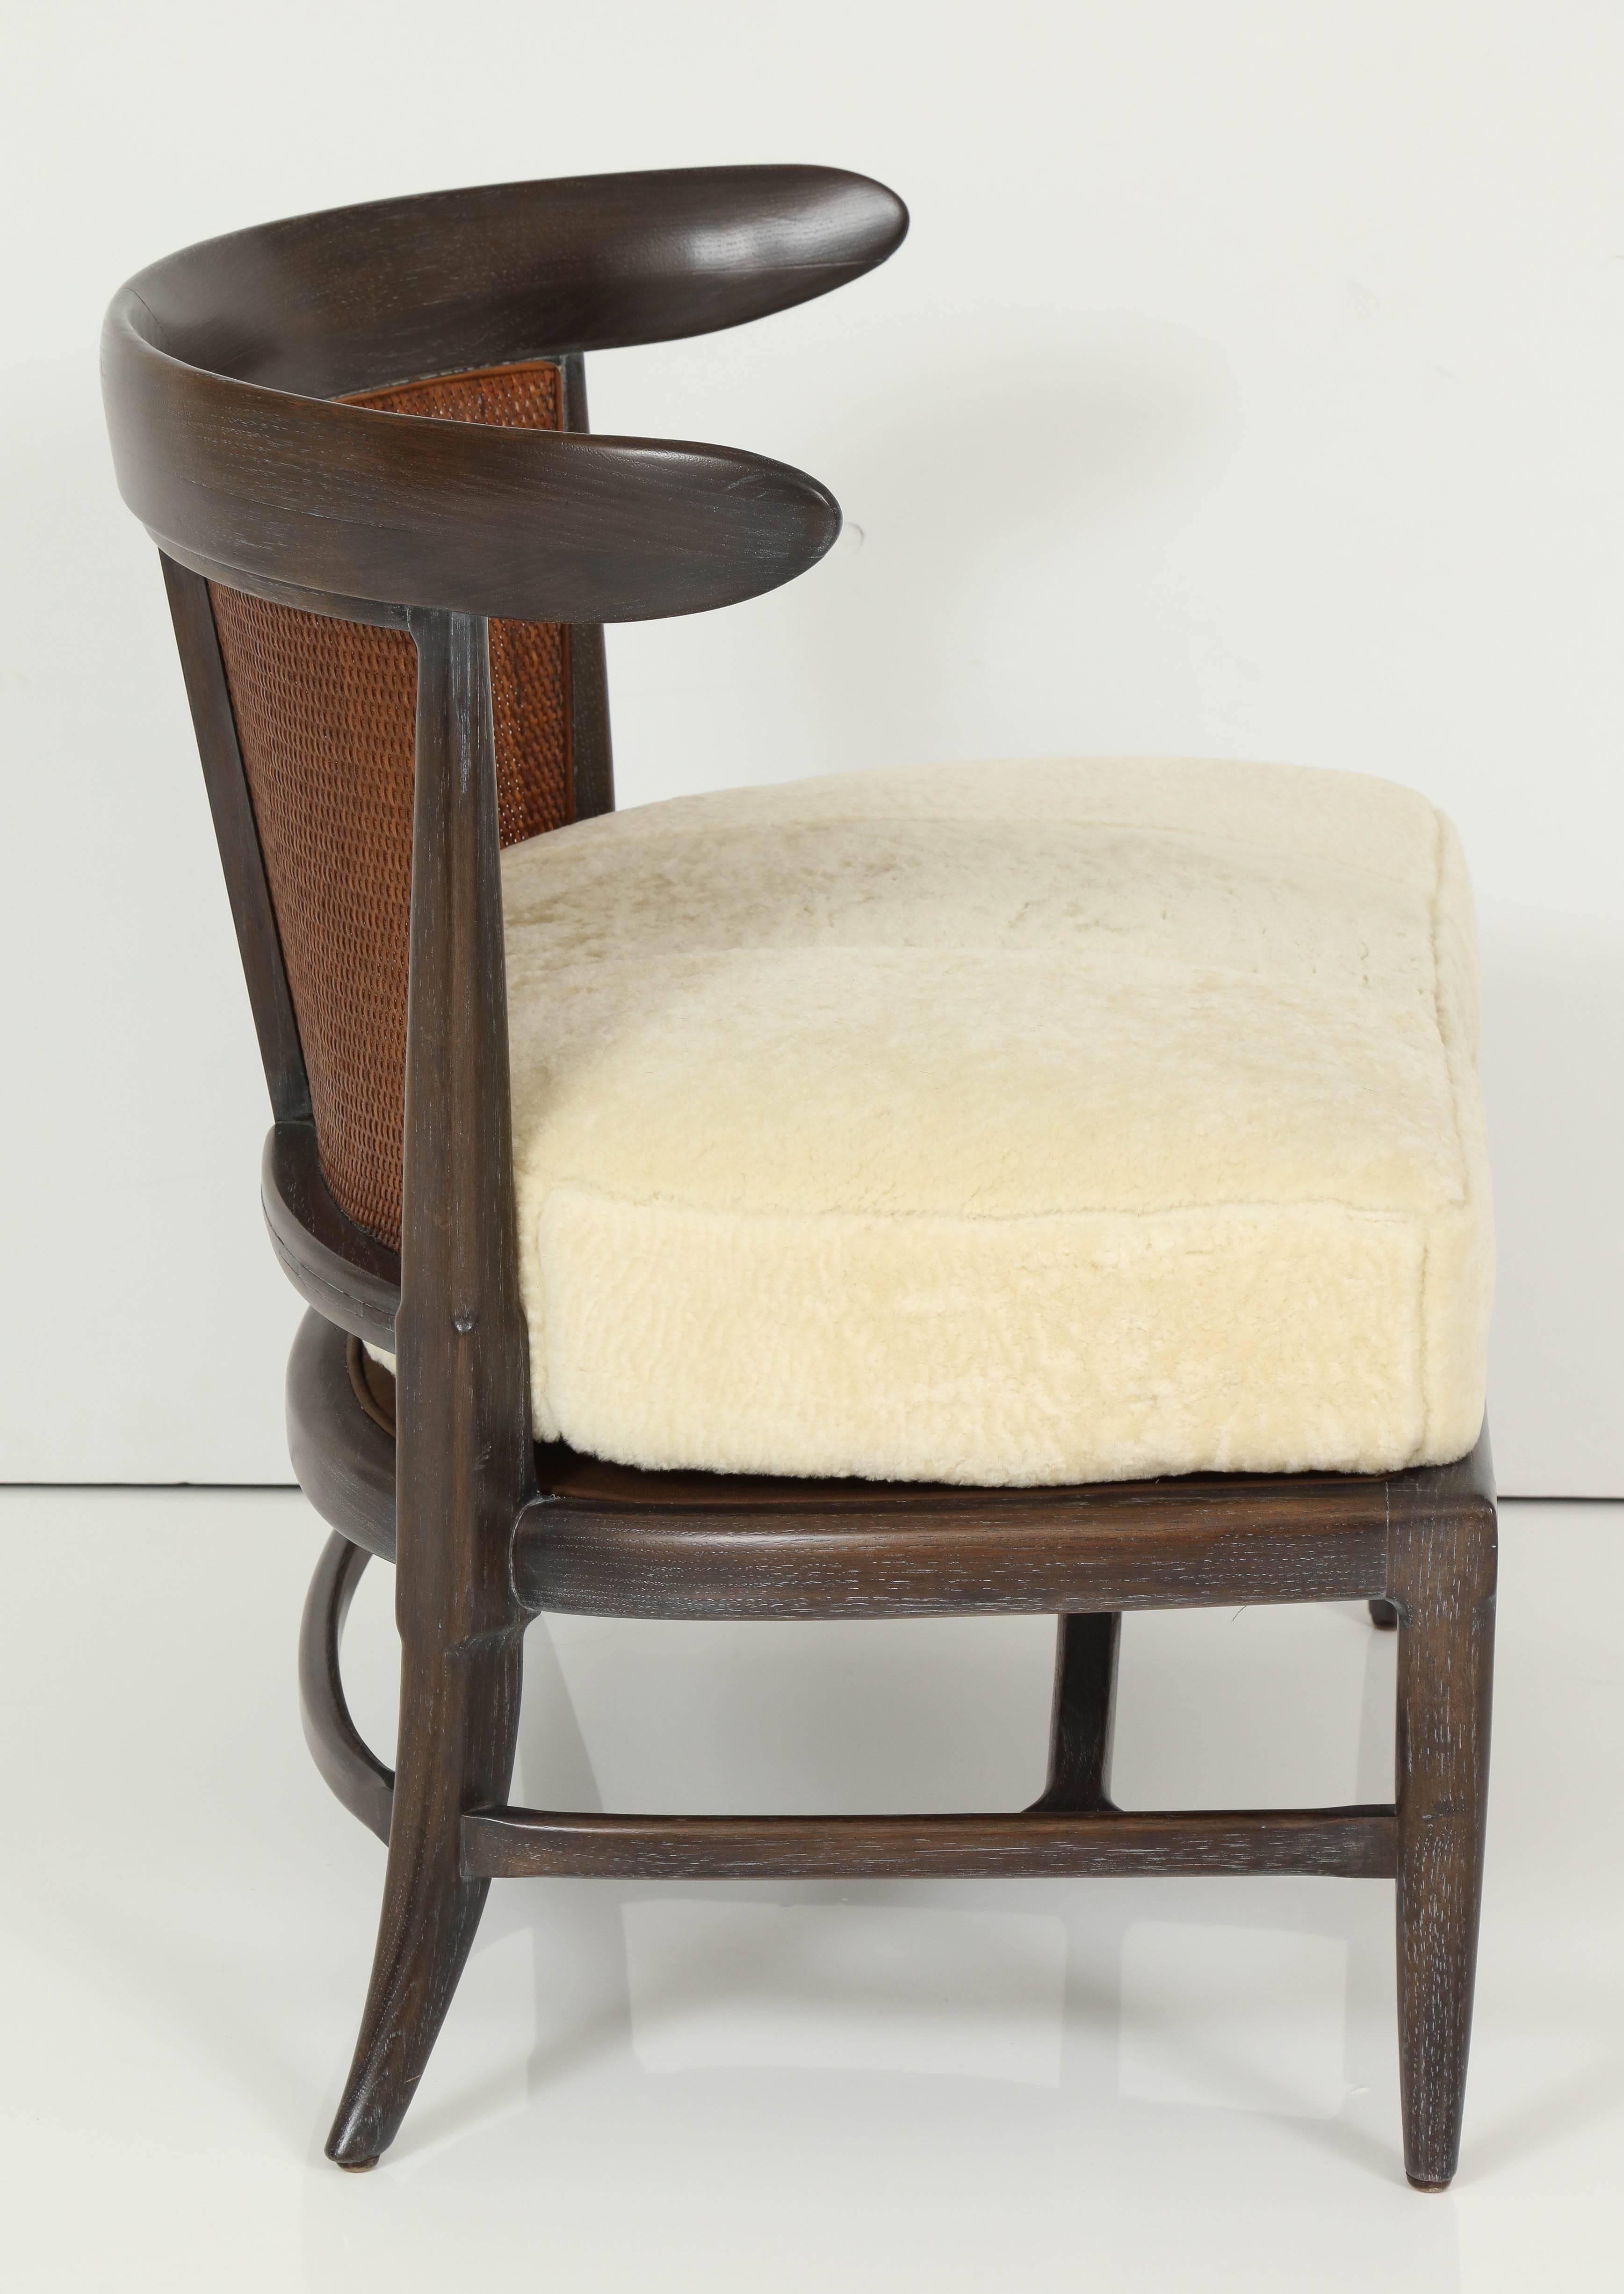 Mid-20th Century Tomlinson Shearling Chair